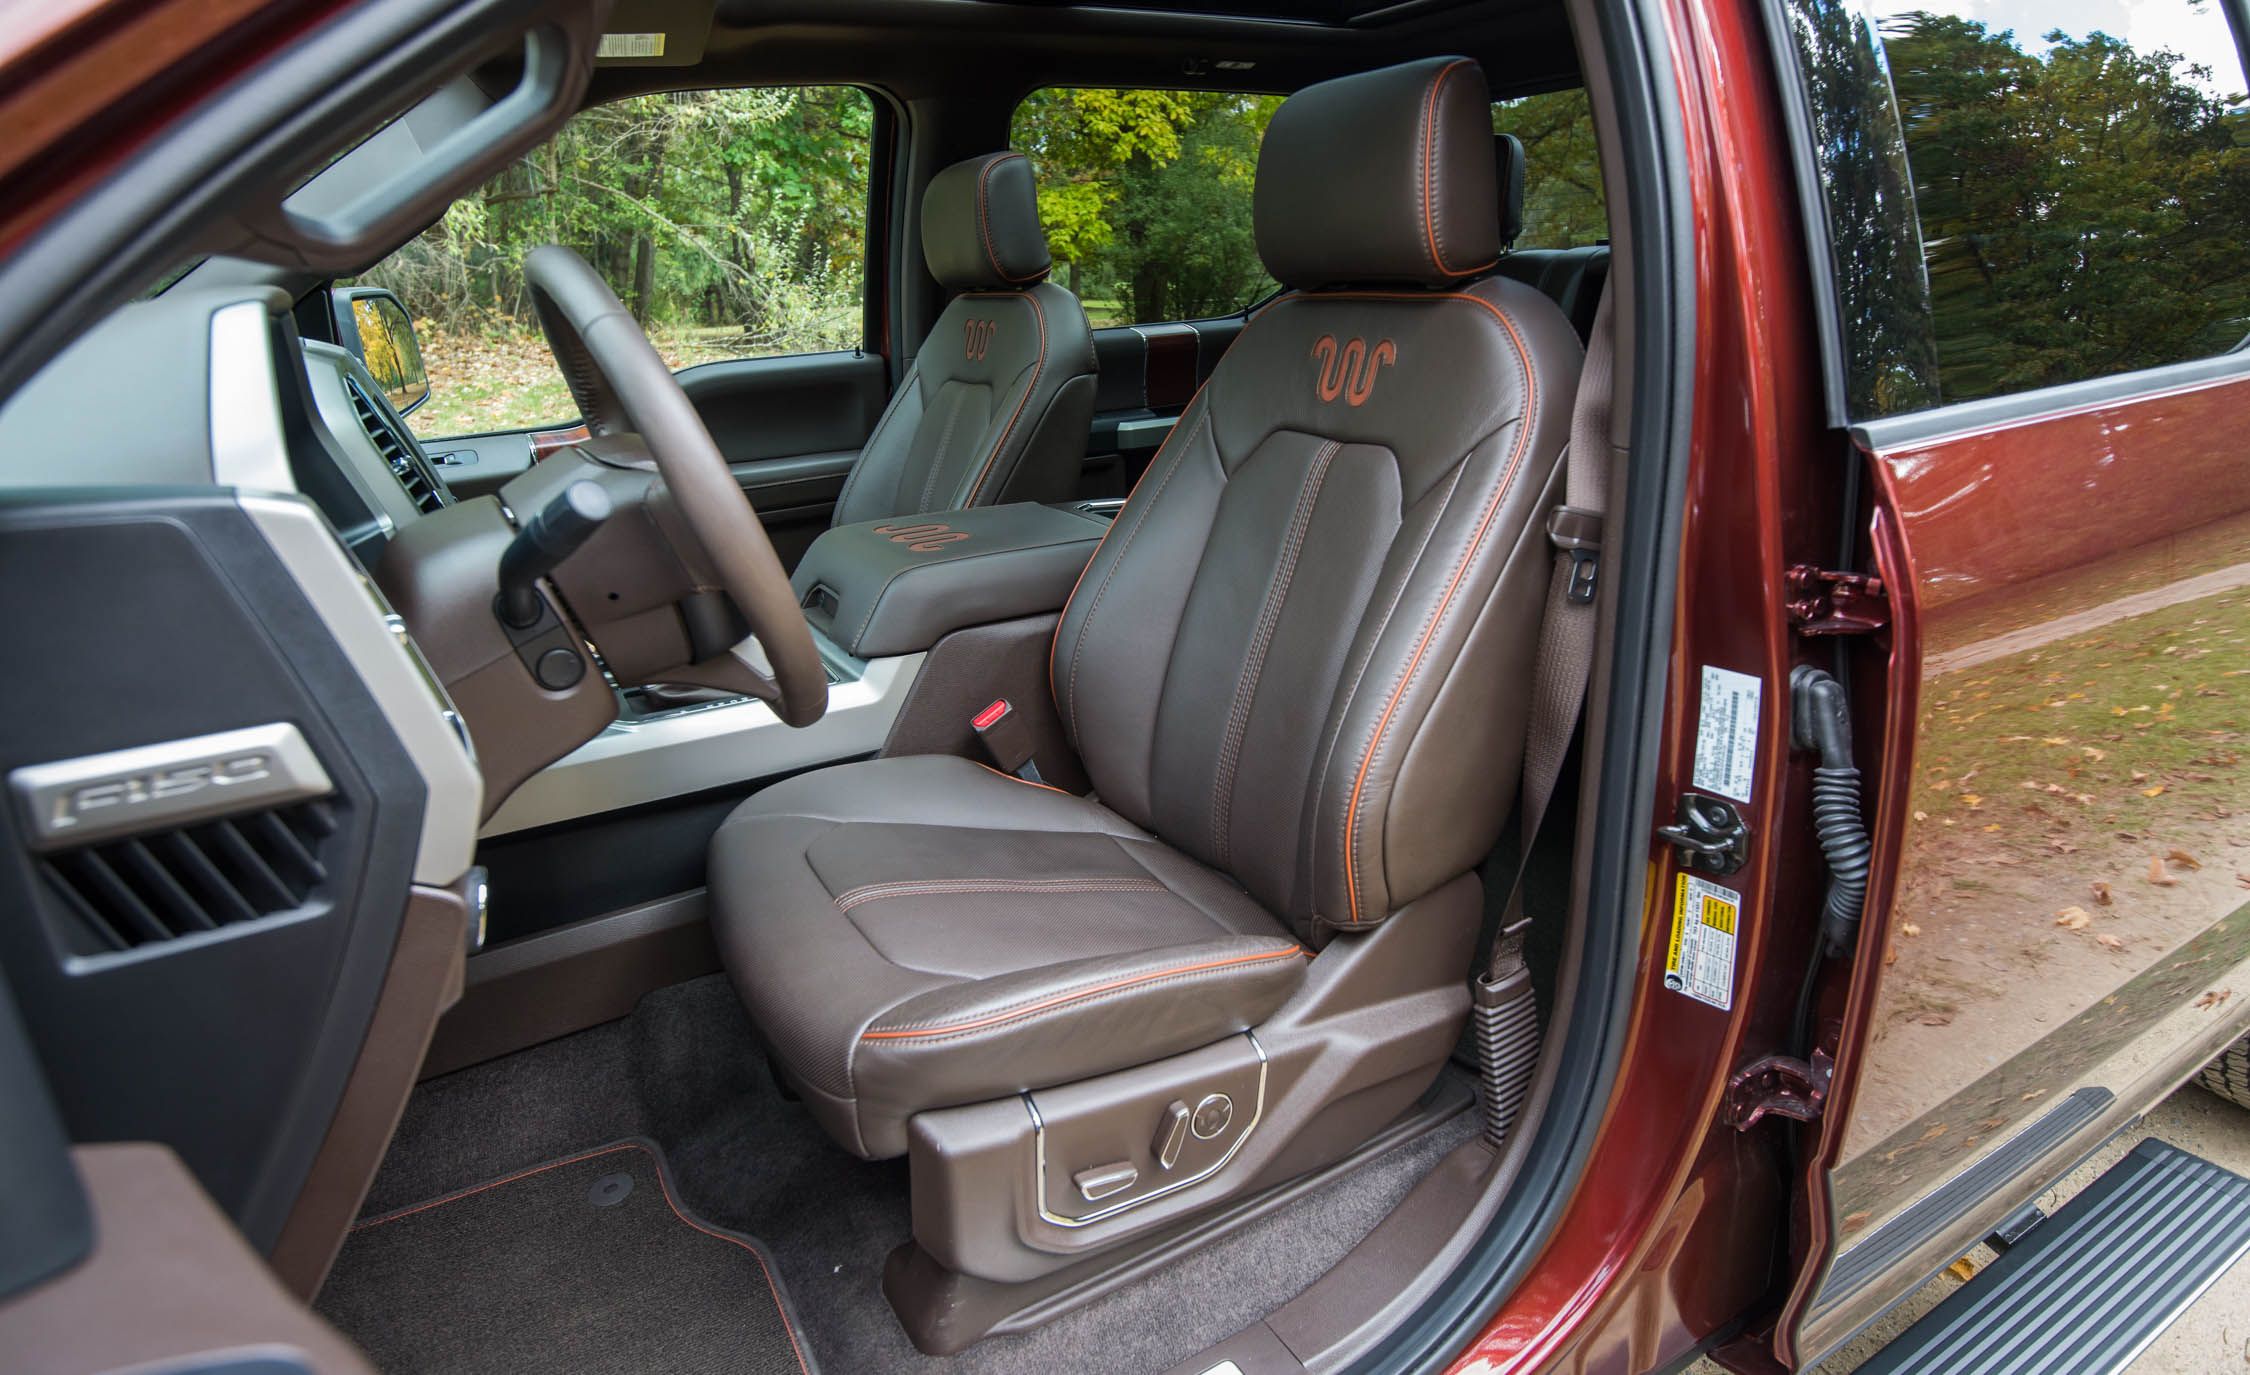 2017 Ford F 150 King Ranch Interior Seats Driver (View 24 of 50)